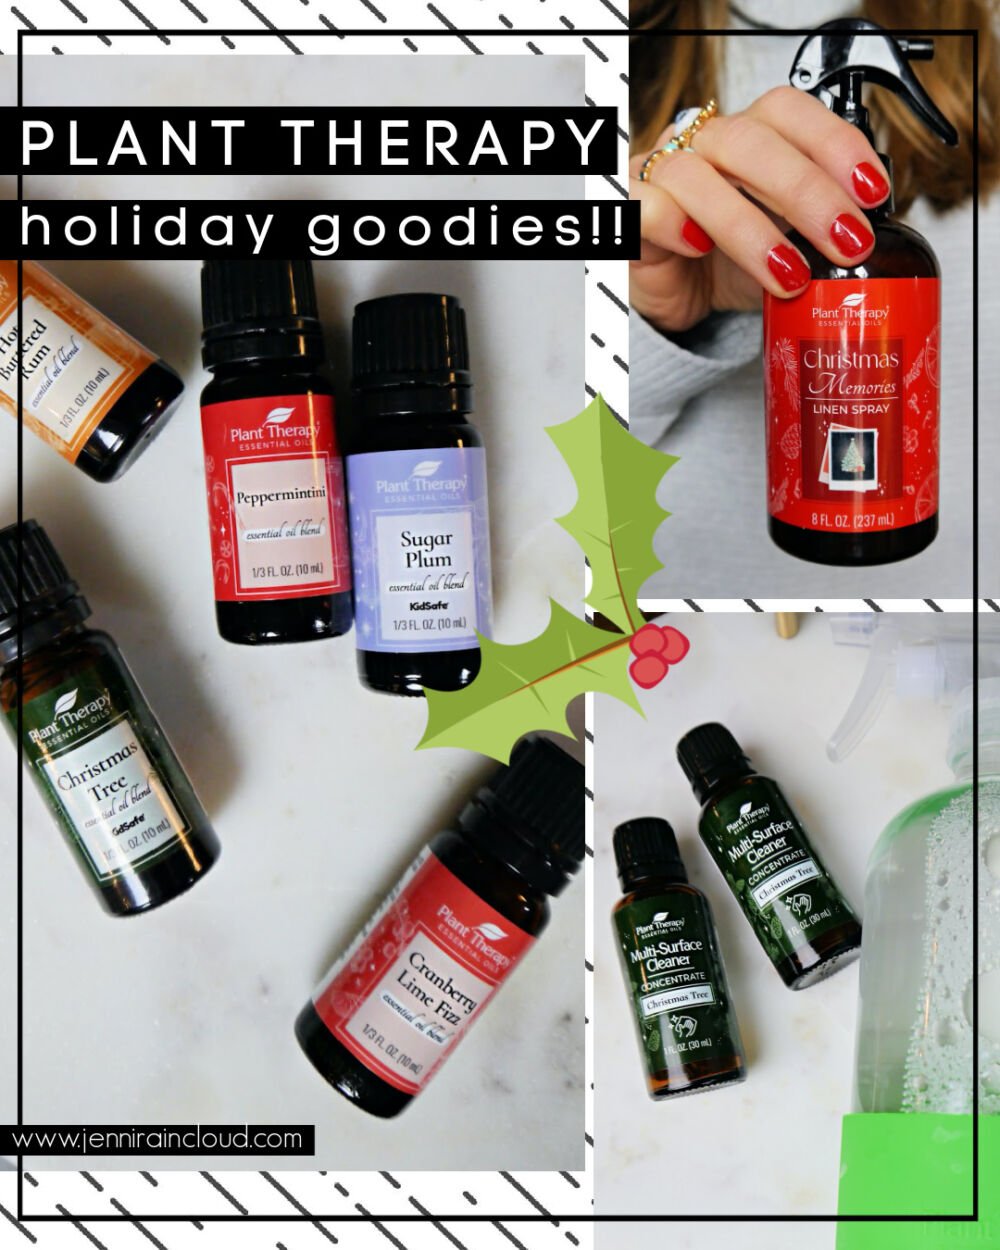 Plant Therapy Holiday Product picture collage